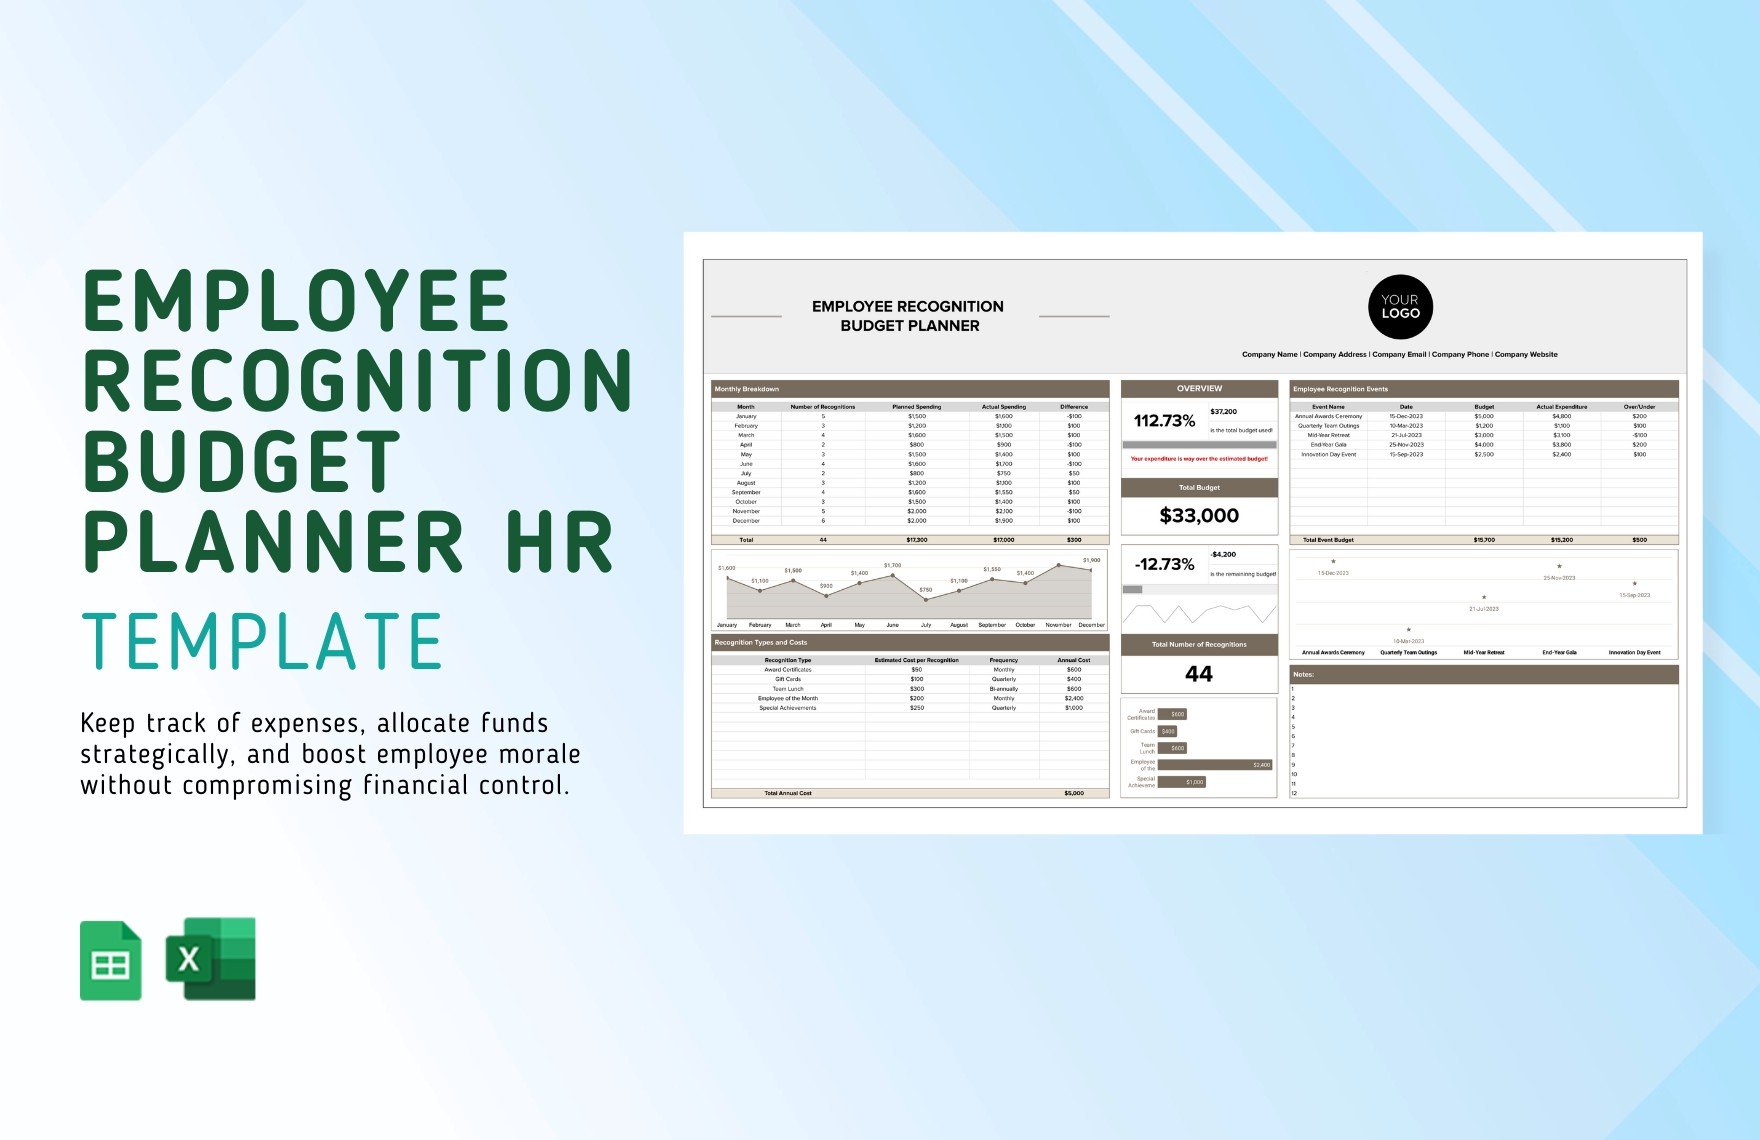 Employee Recognition Budget Planner HR Template